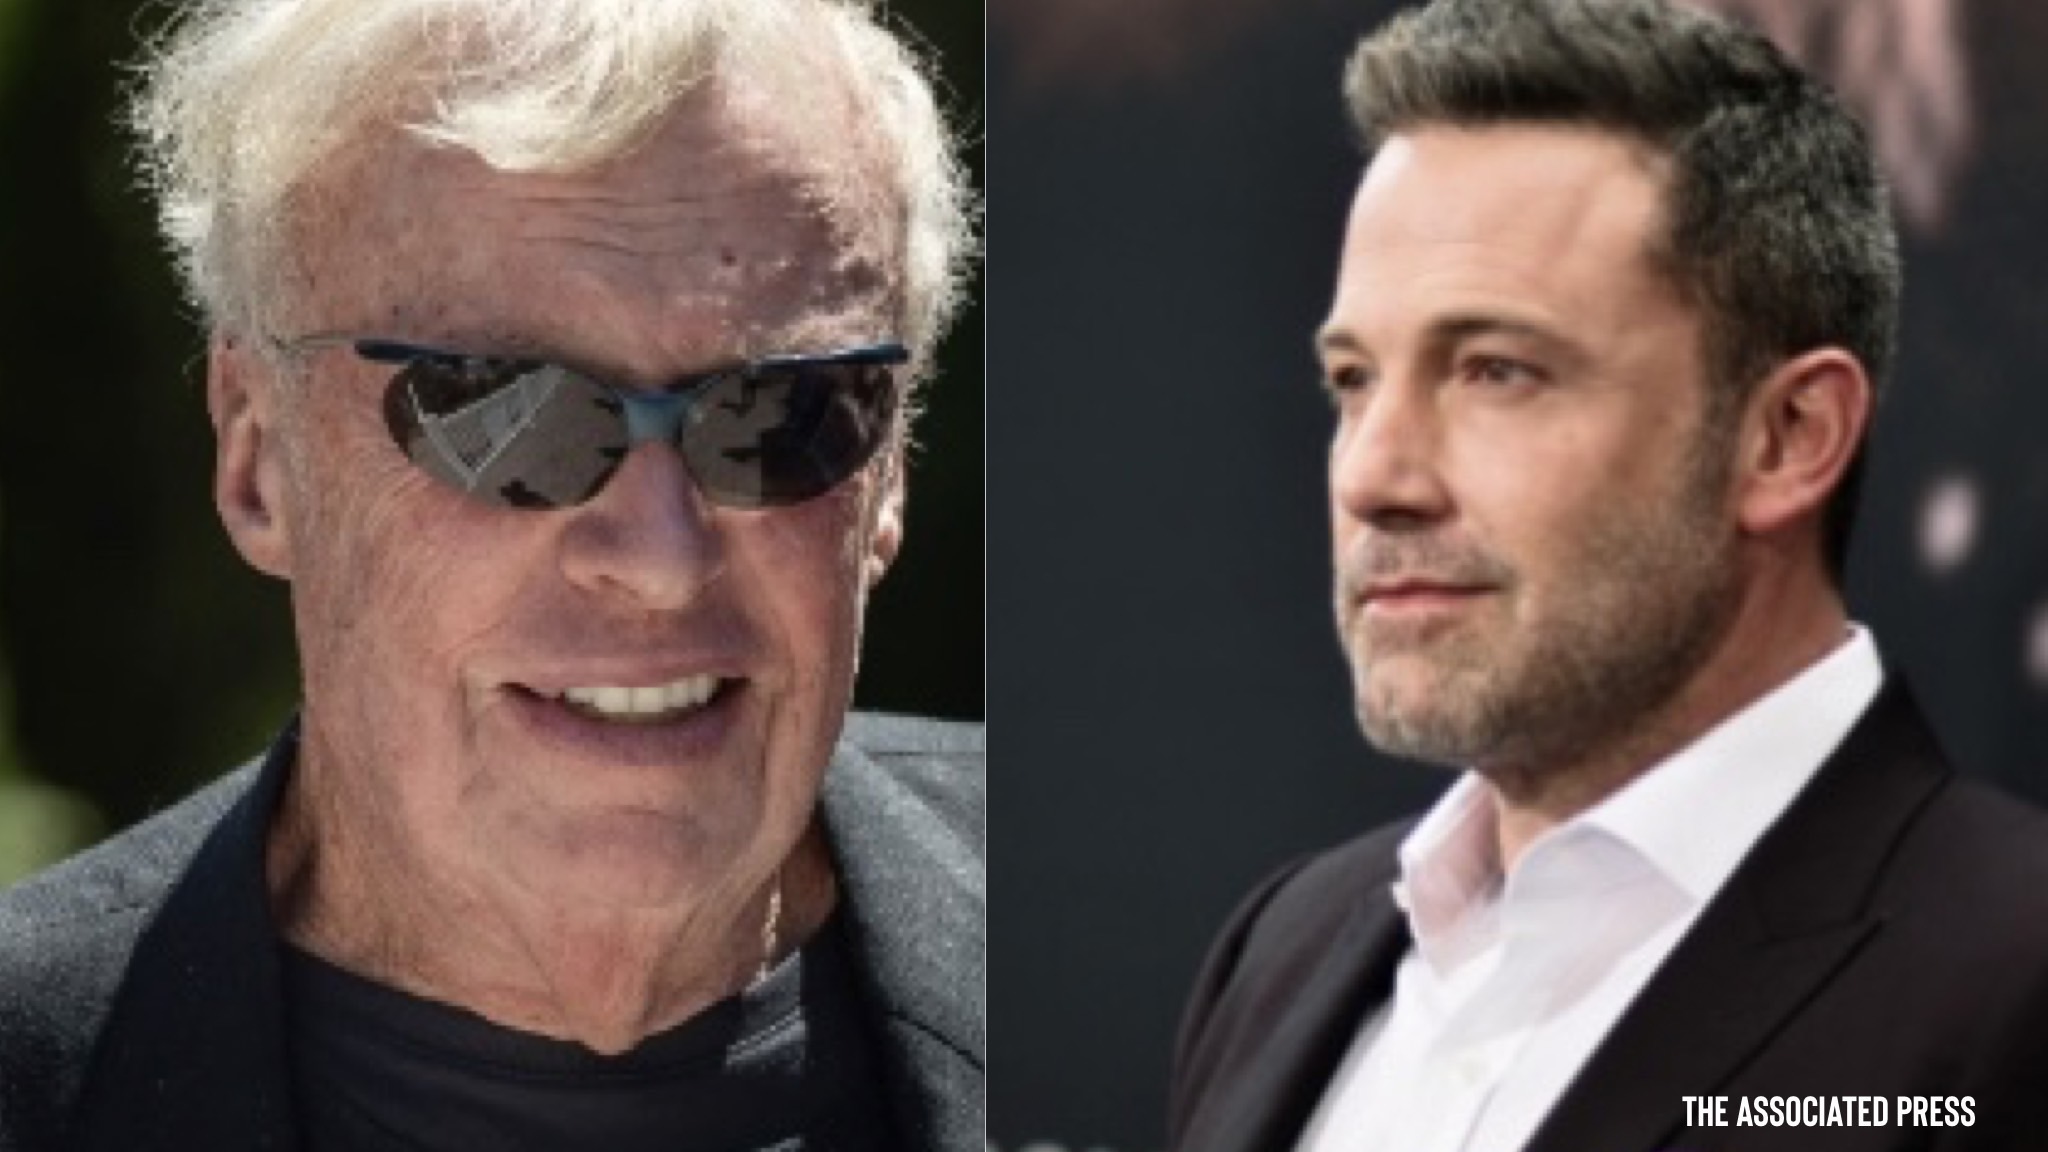 Ben Affleck Celebrity Porn - Ben Affleck to play Phil Knight in Nike drama 'Air'